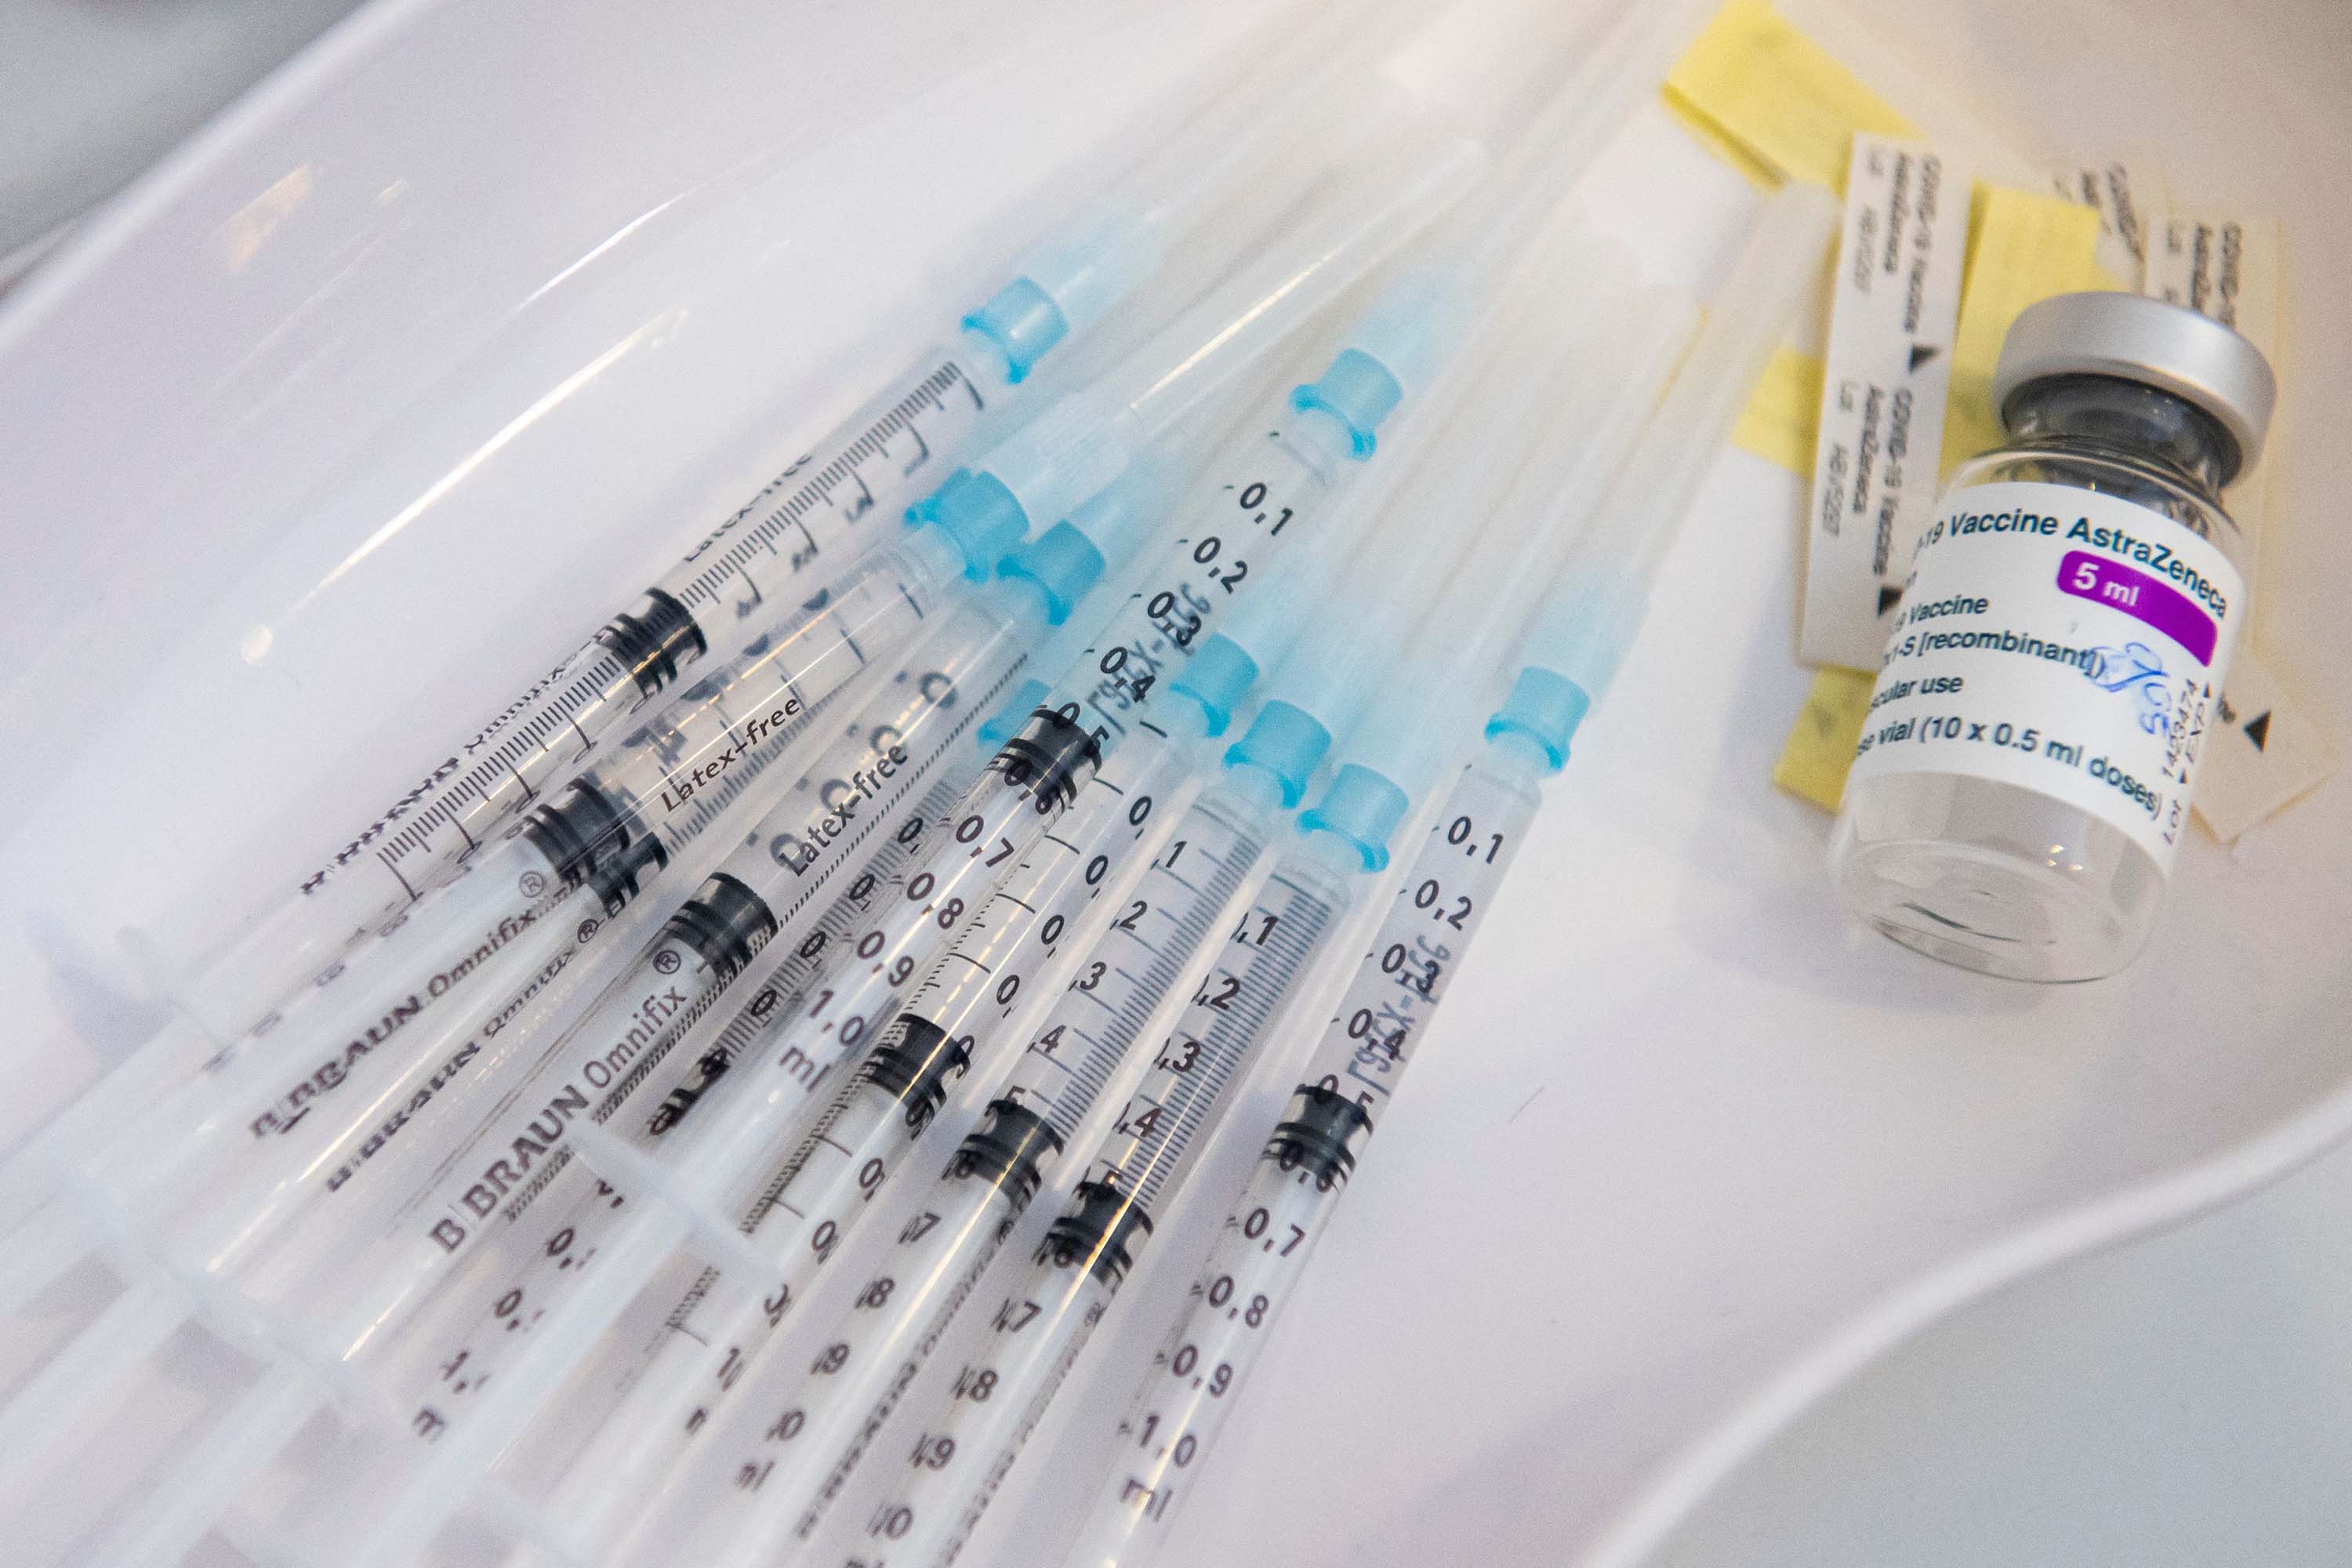 Doses of the AstraZeneca vaccine are seen at a doctor's office in Deisenhofen, Germany, on March 31.